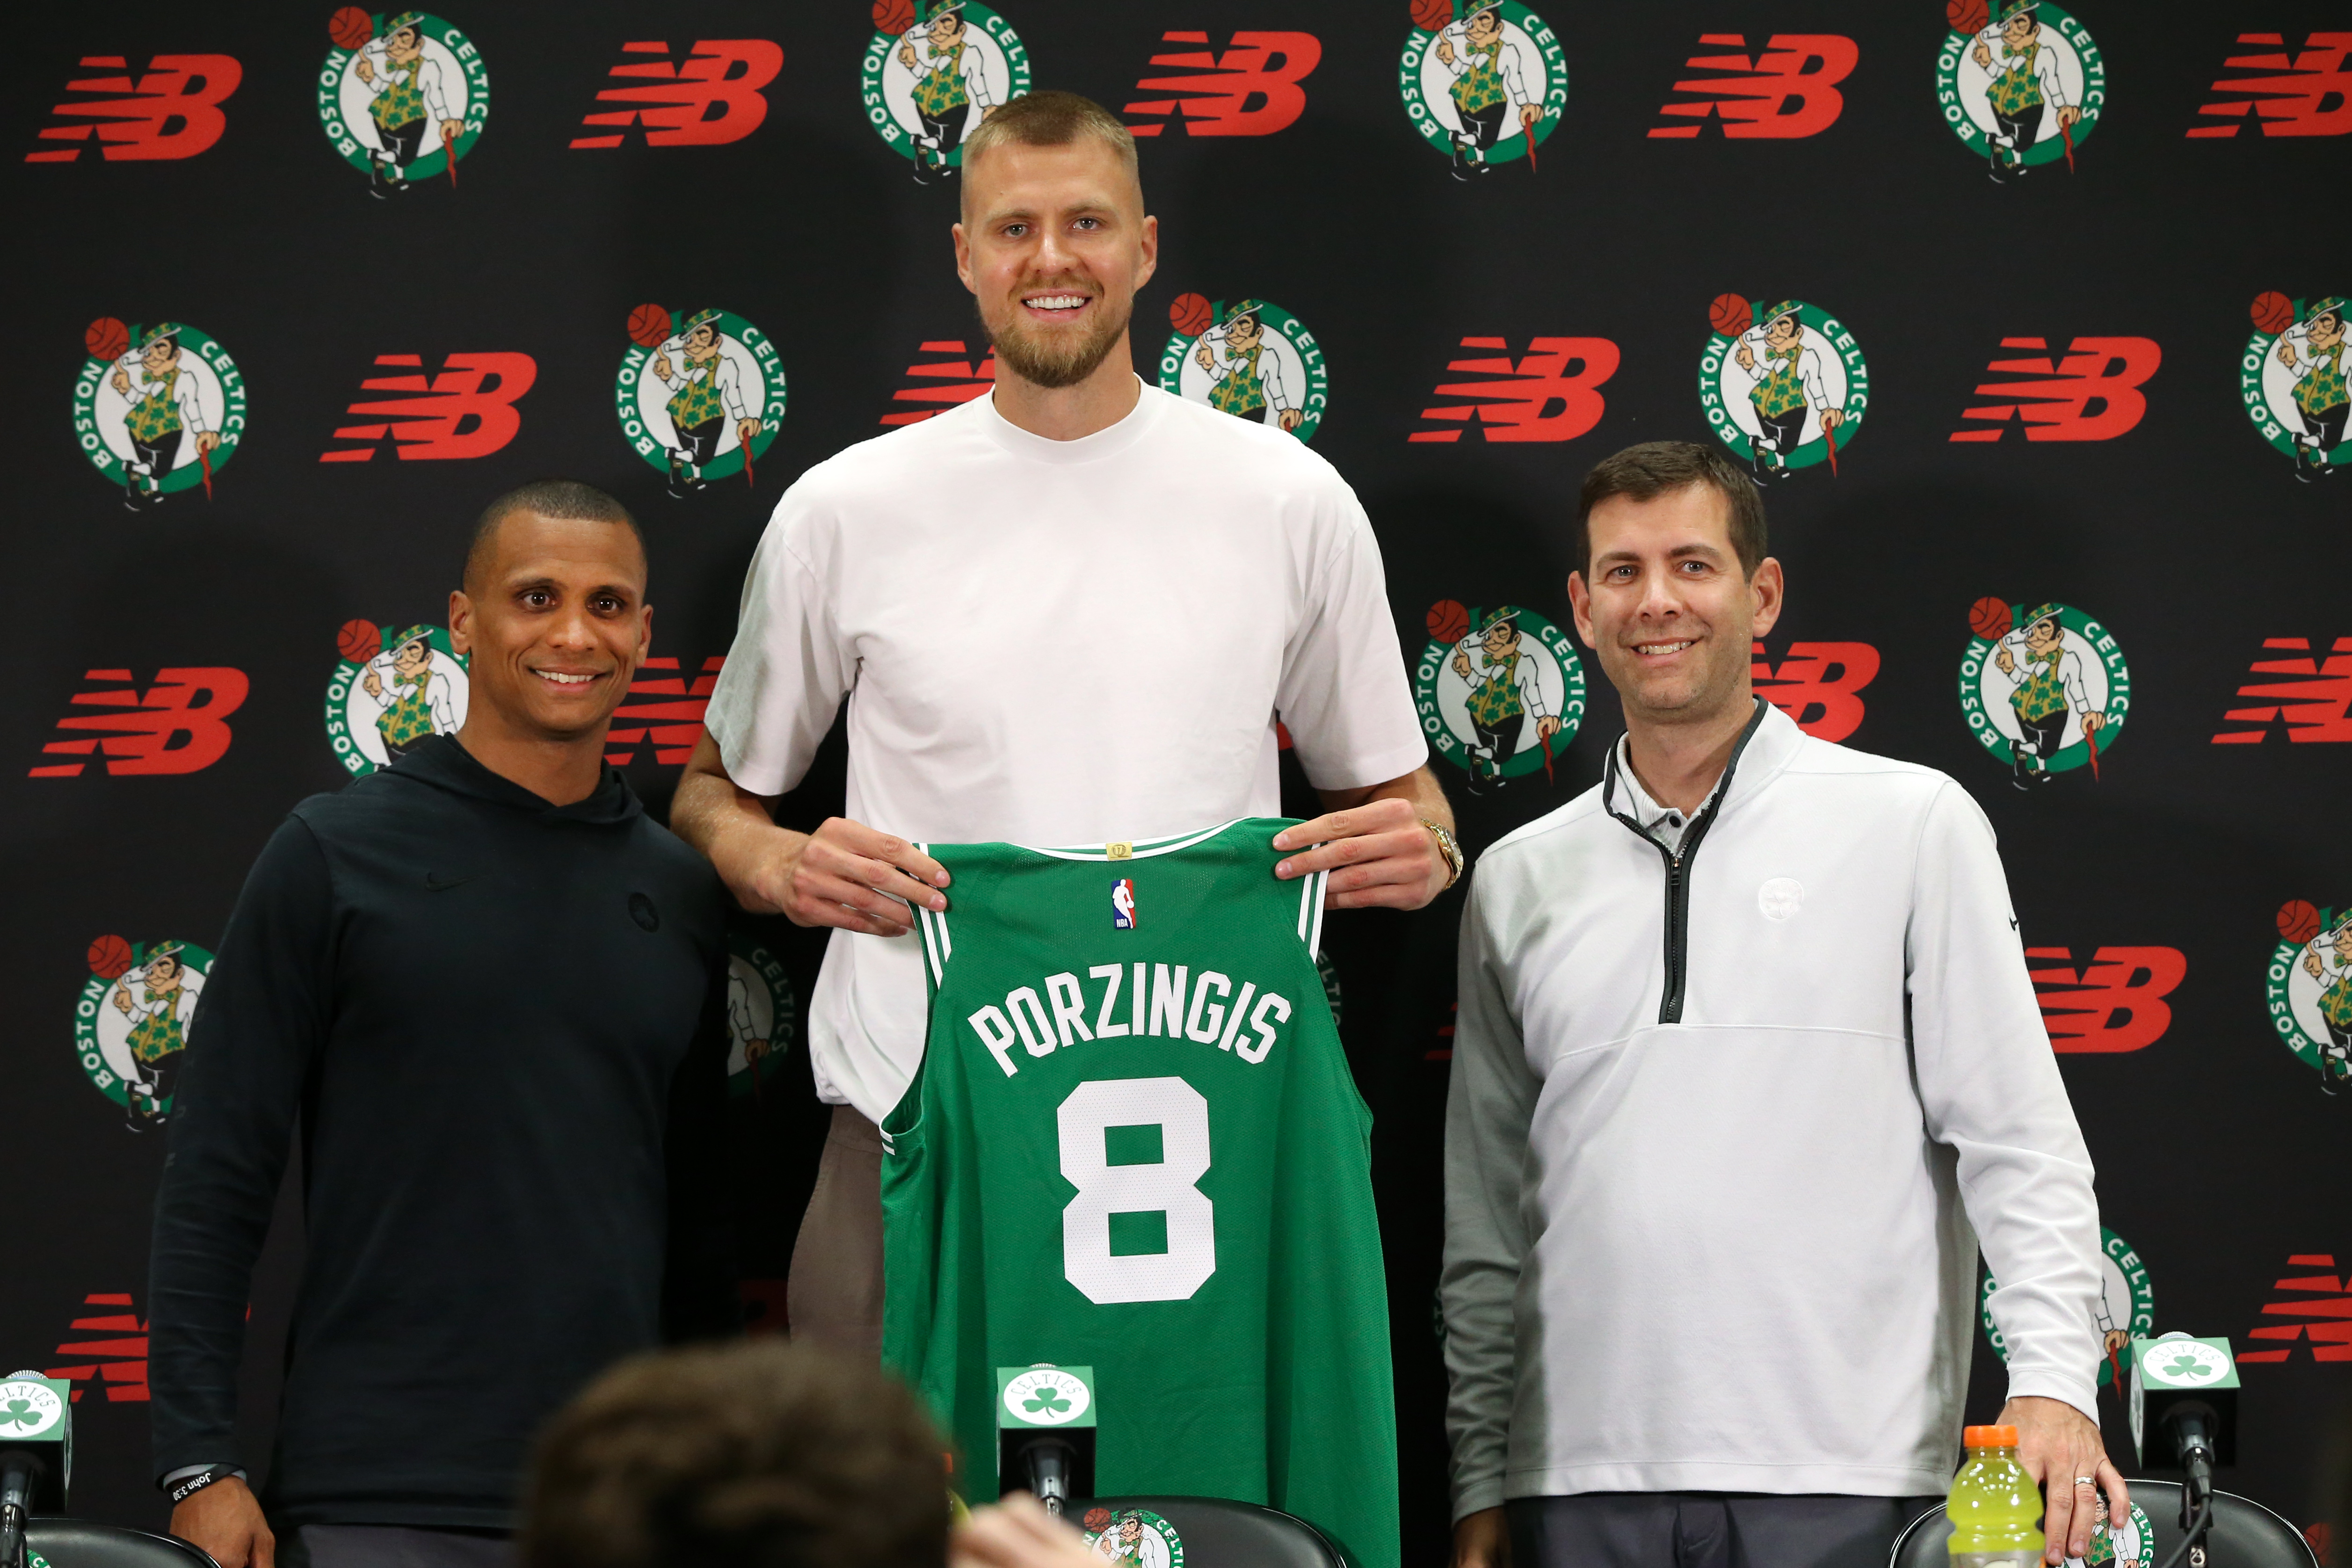 Kristaps Porzingis hopes to be a perfect fit for the Celtics: 'I'm going to  do everything I can to help this team.' - The Boston Globe